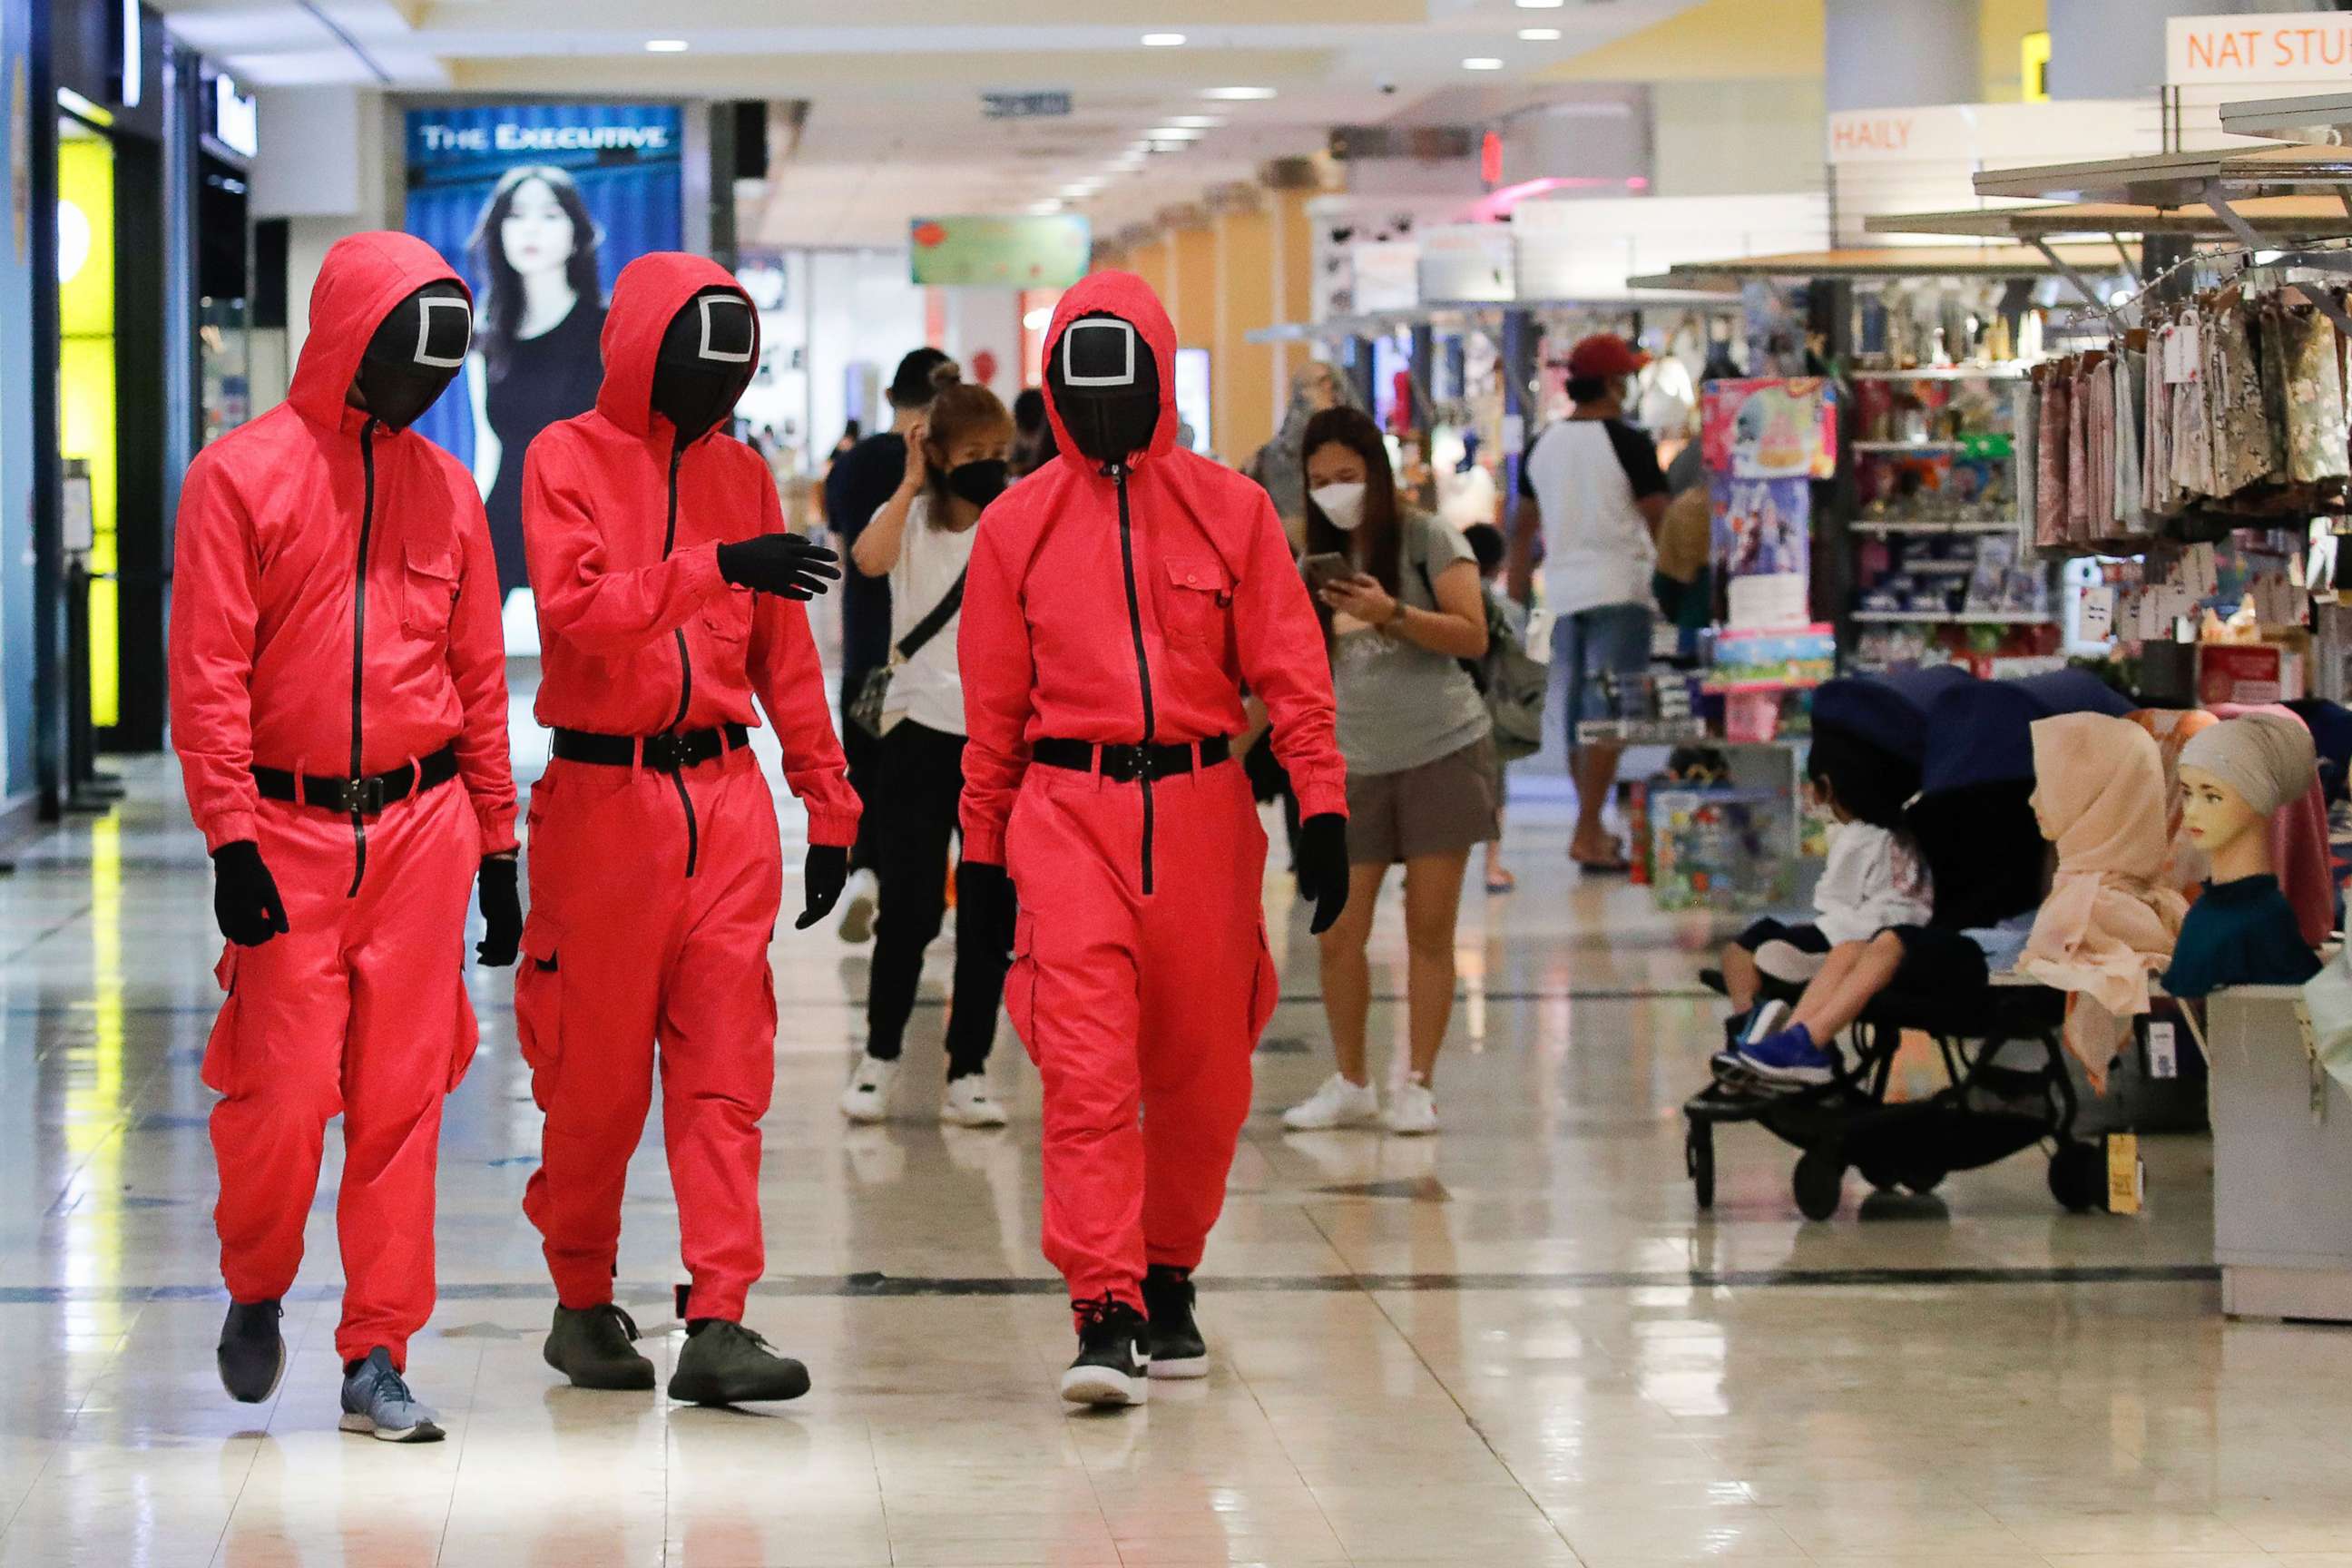 PHOTO: Pink officers from Squid Game walk inside Sunway Pyramid shopping mall in Subang, outside Kuala Lumpur in Malaysia, Oct. 20, 2021.